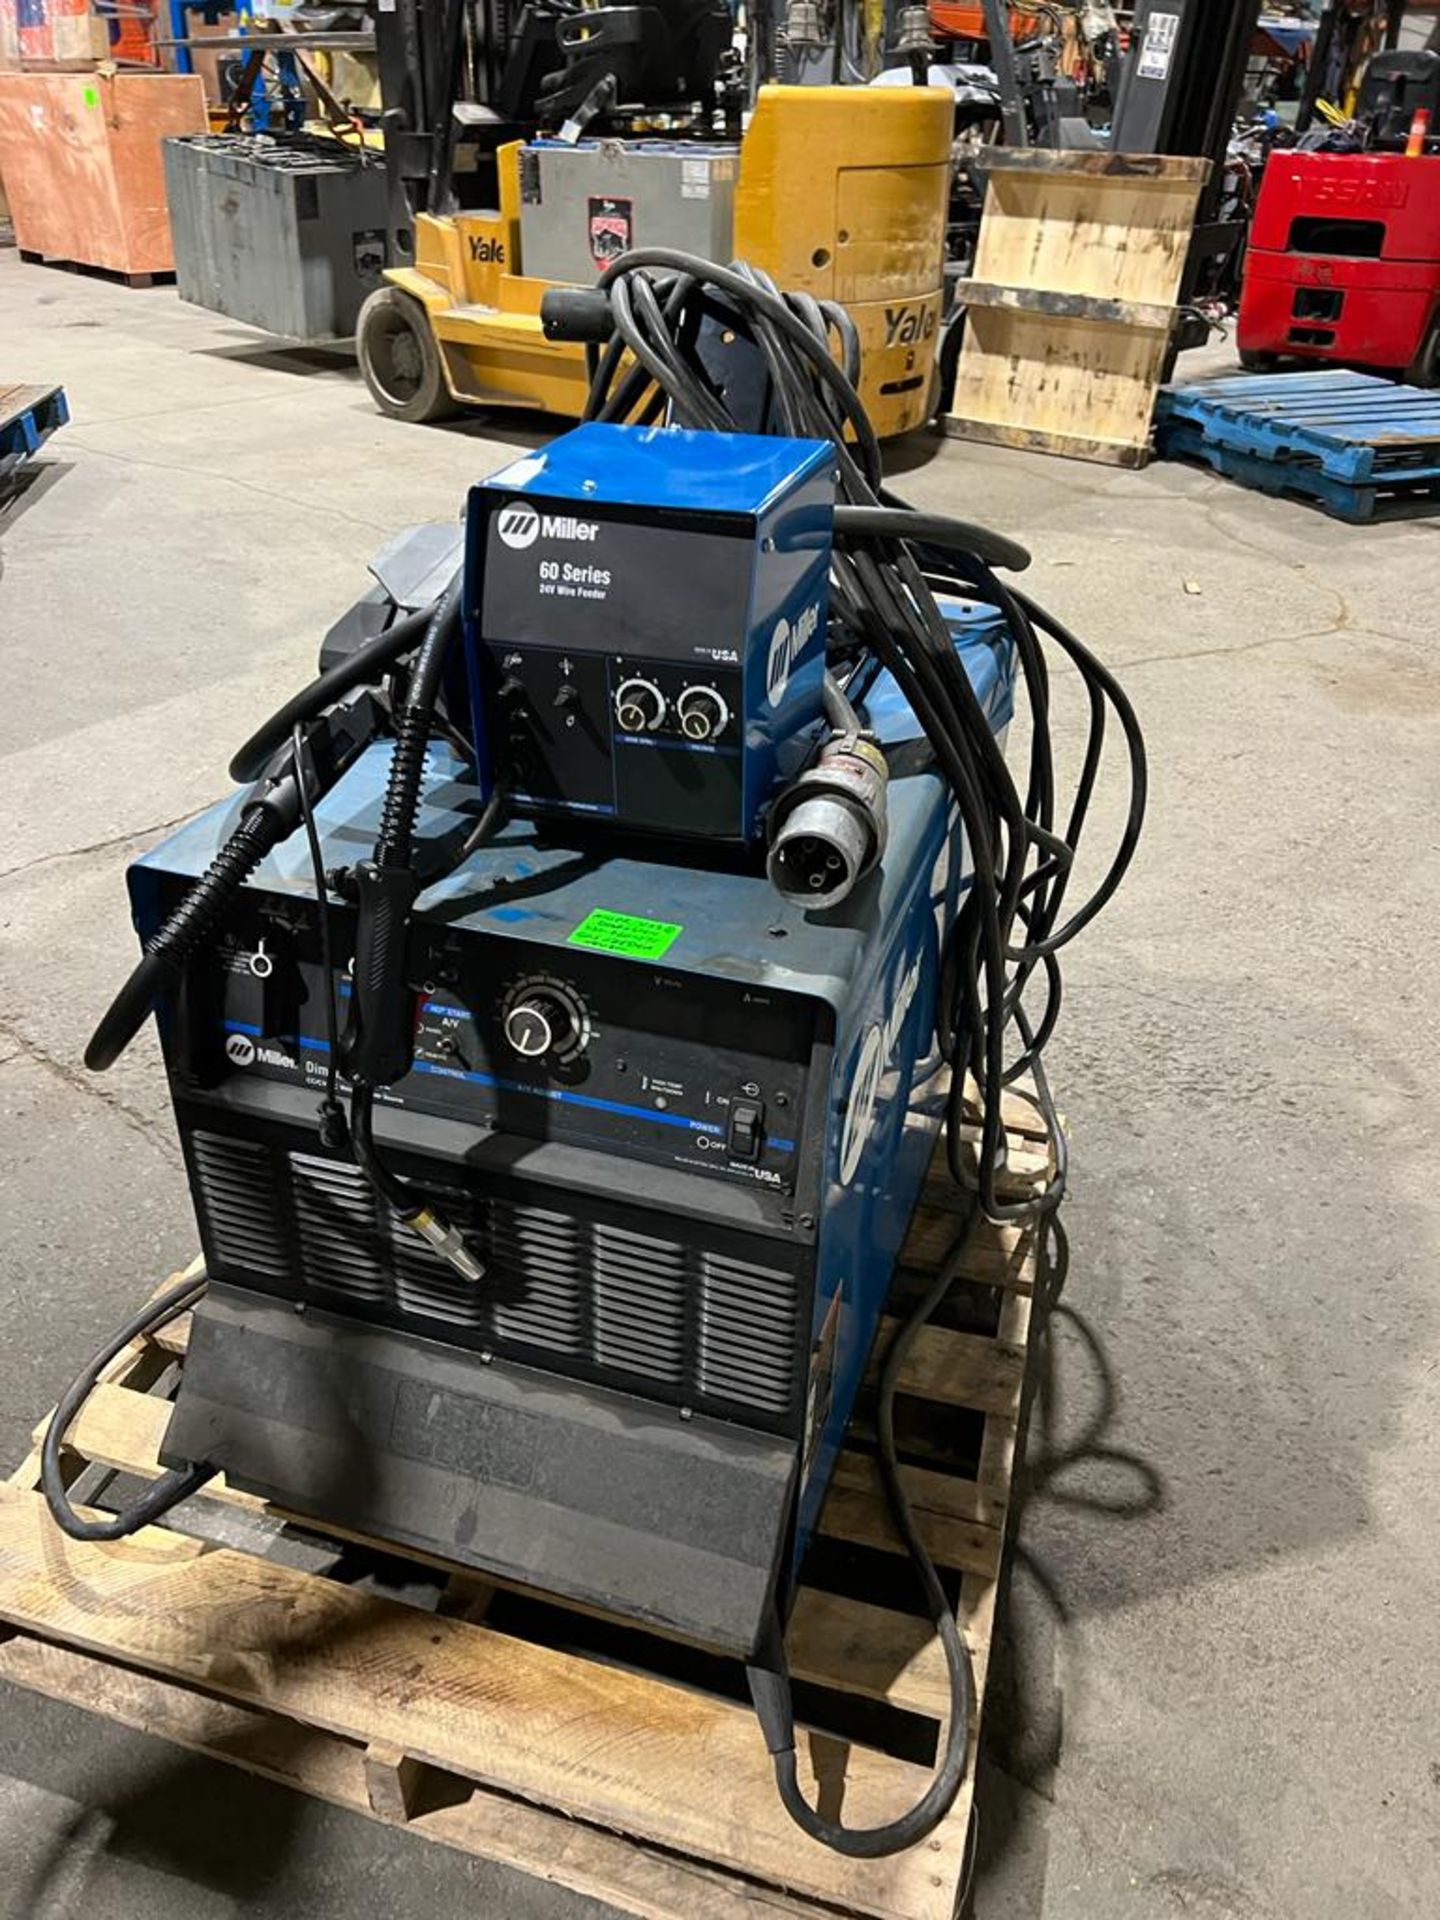 Miller 452 Dimension Mig Welder with 60 Series 4-Wheel Wire Feeder Complete with NEW GUN LOTS of